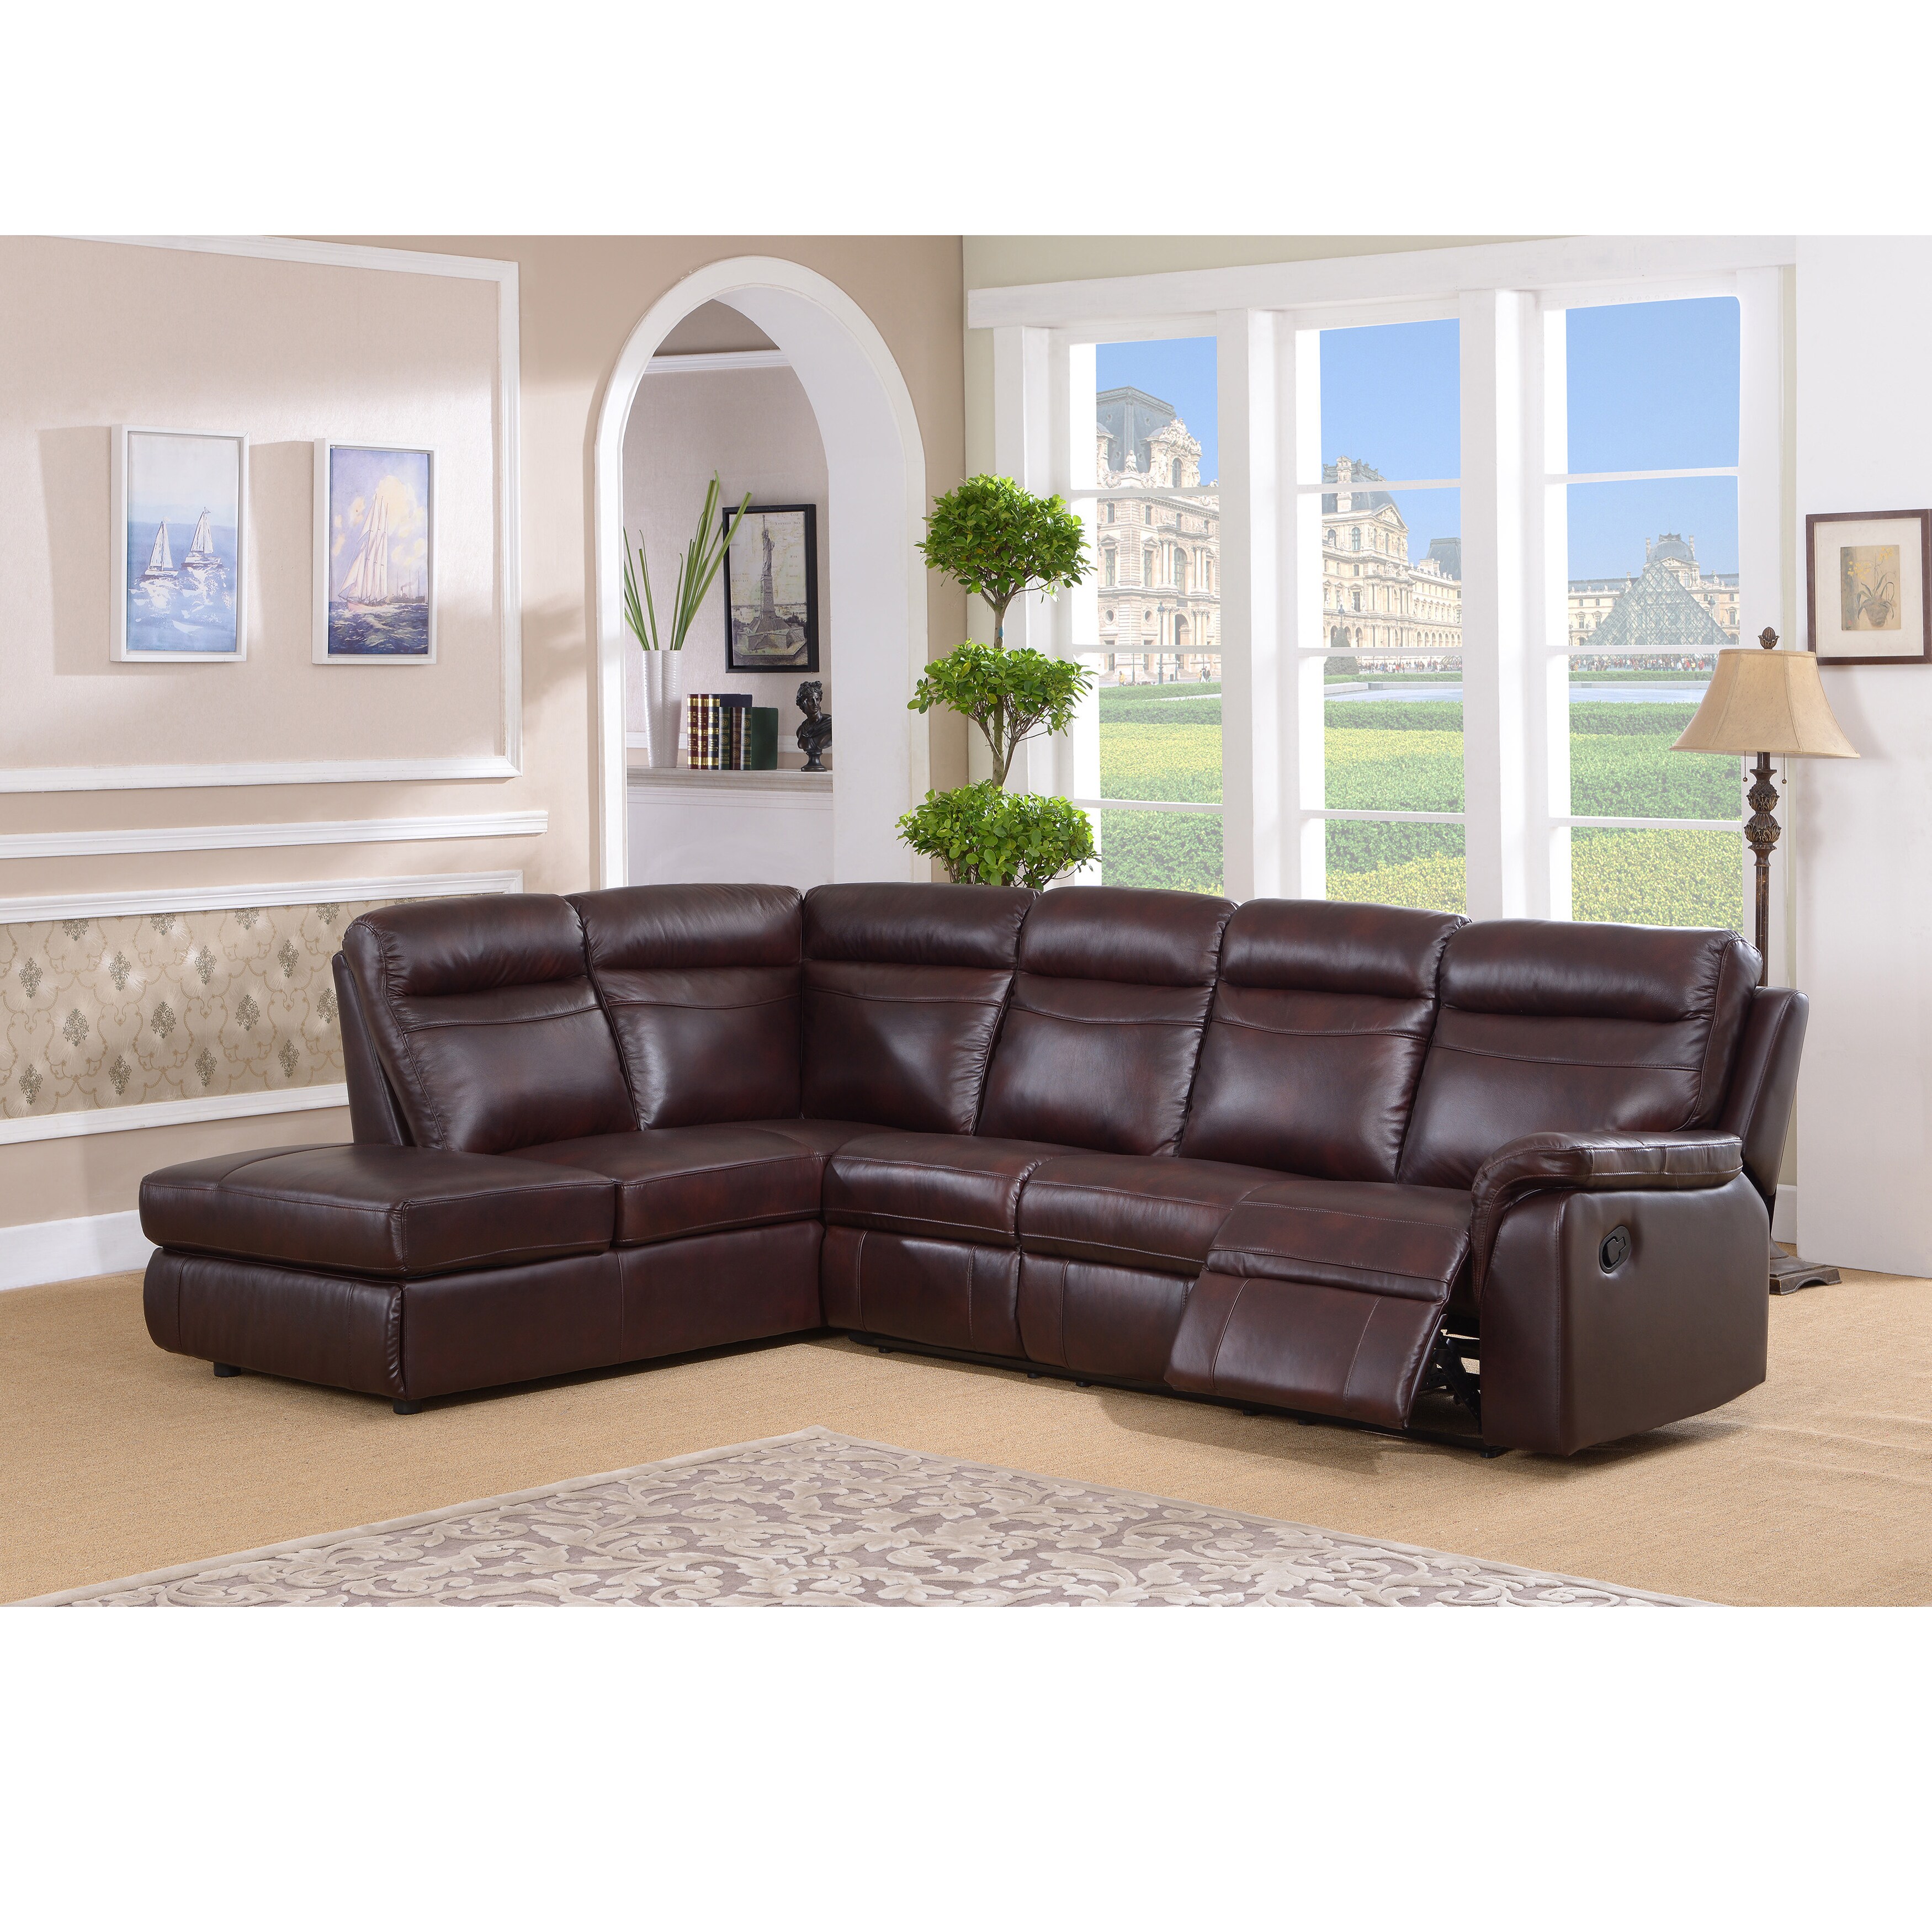 Shop Monti Top Grain Burgundy Leather Lay Flat Reclining Sectional